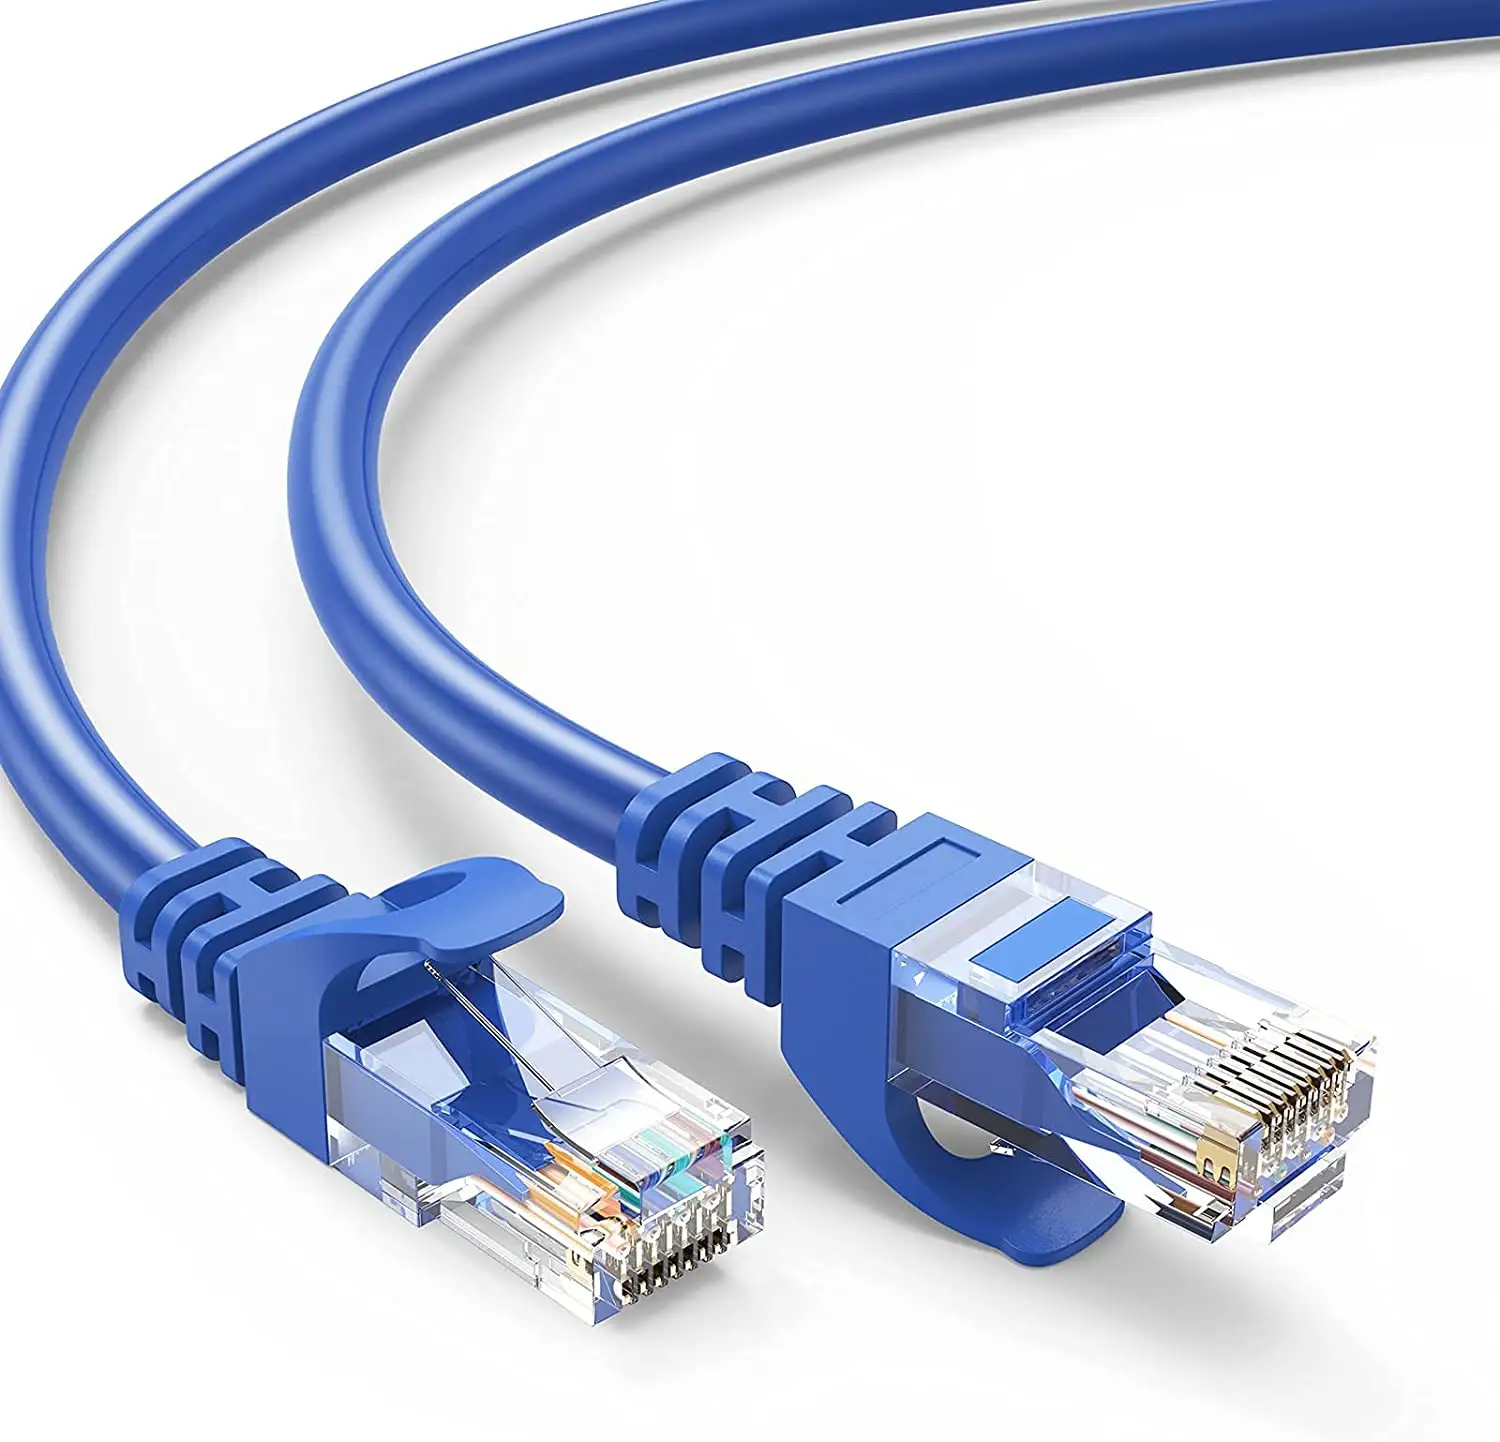 UTP Cat 6 Lan Cable Network Cable RJ45 LAN CAT 6 Ethernet Patch Cord Lan Cable For Modem, Router, Computer